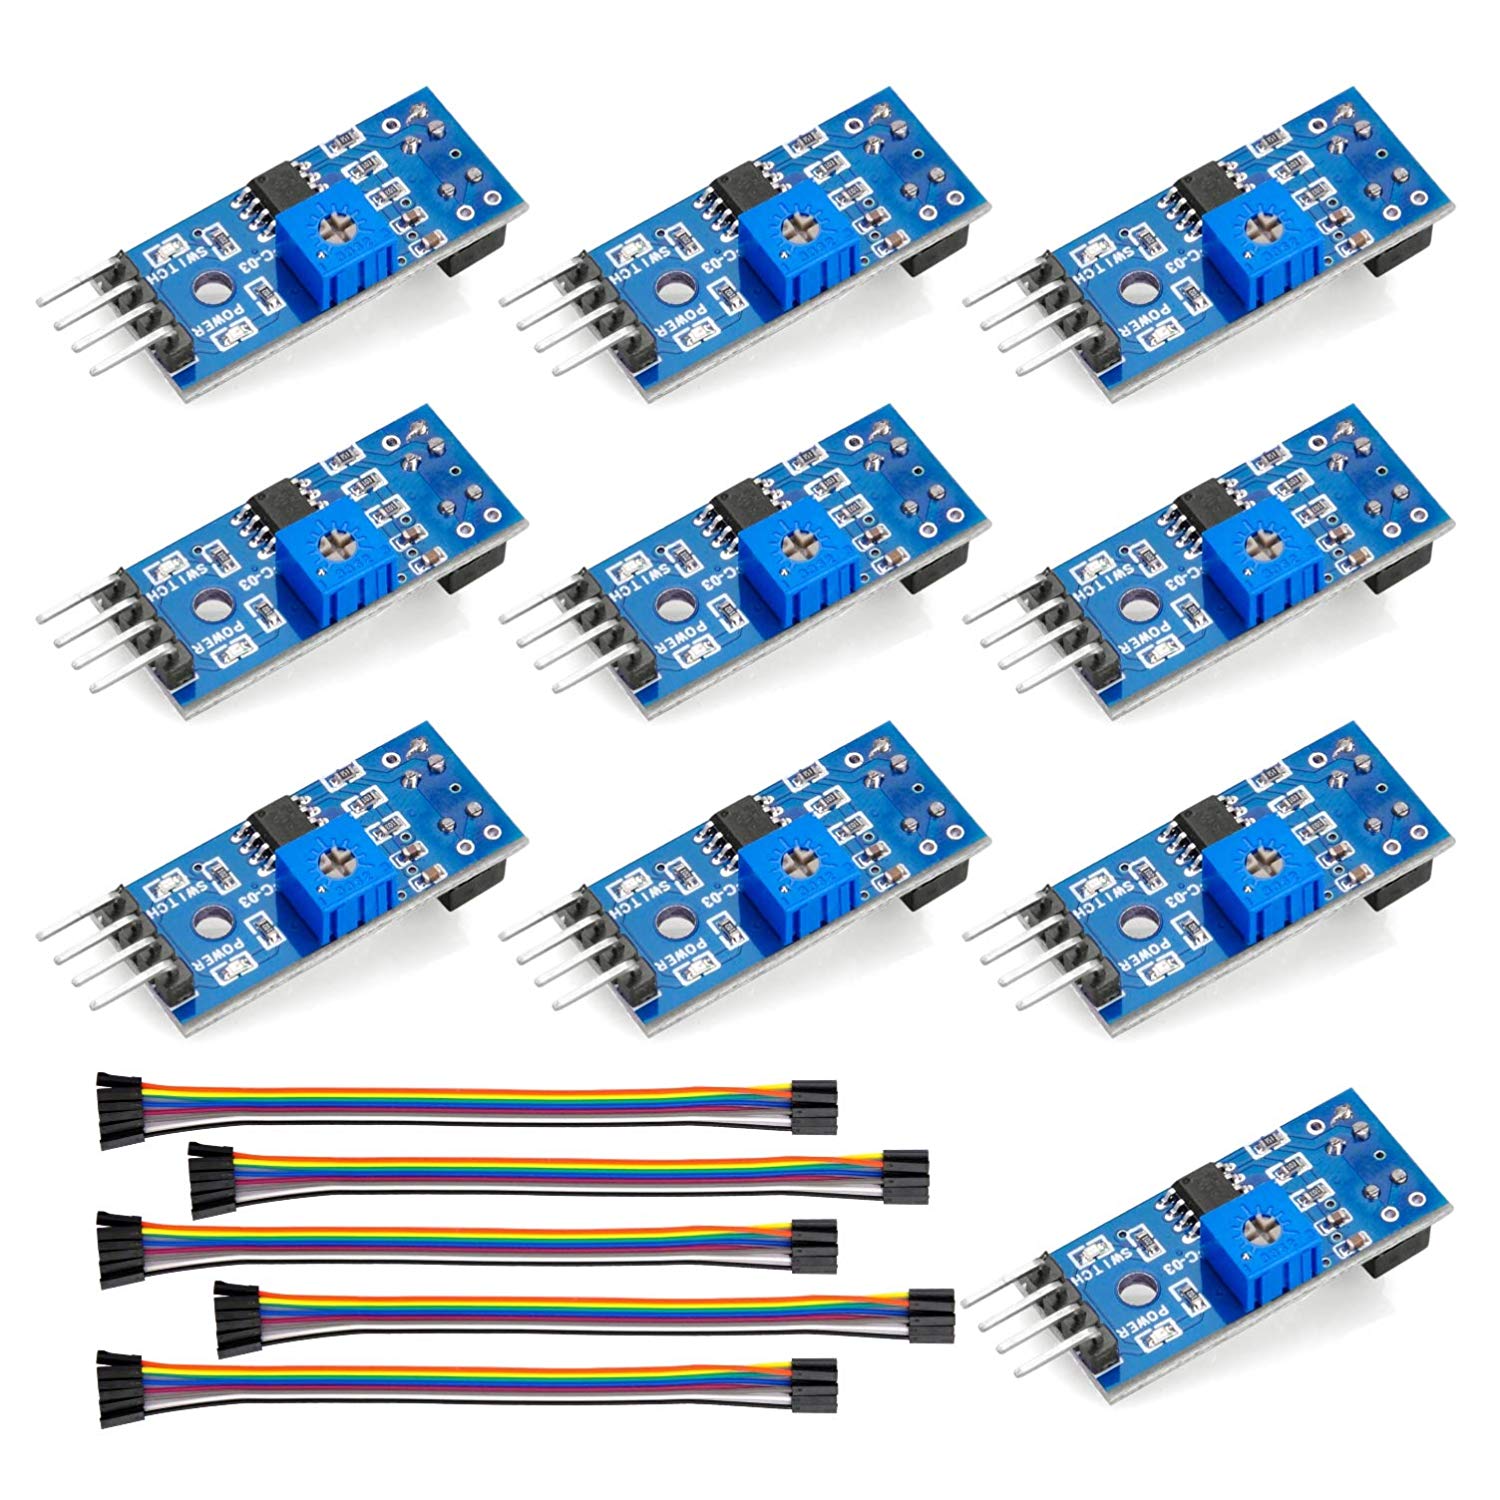 OSOYOO 10PCS TCRT5000 IR Photoelectric Switch Barrier Line Track Sensor Module for Arduino Smart Car Robot with 5 8Pin Female to Female Jumper Wires